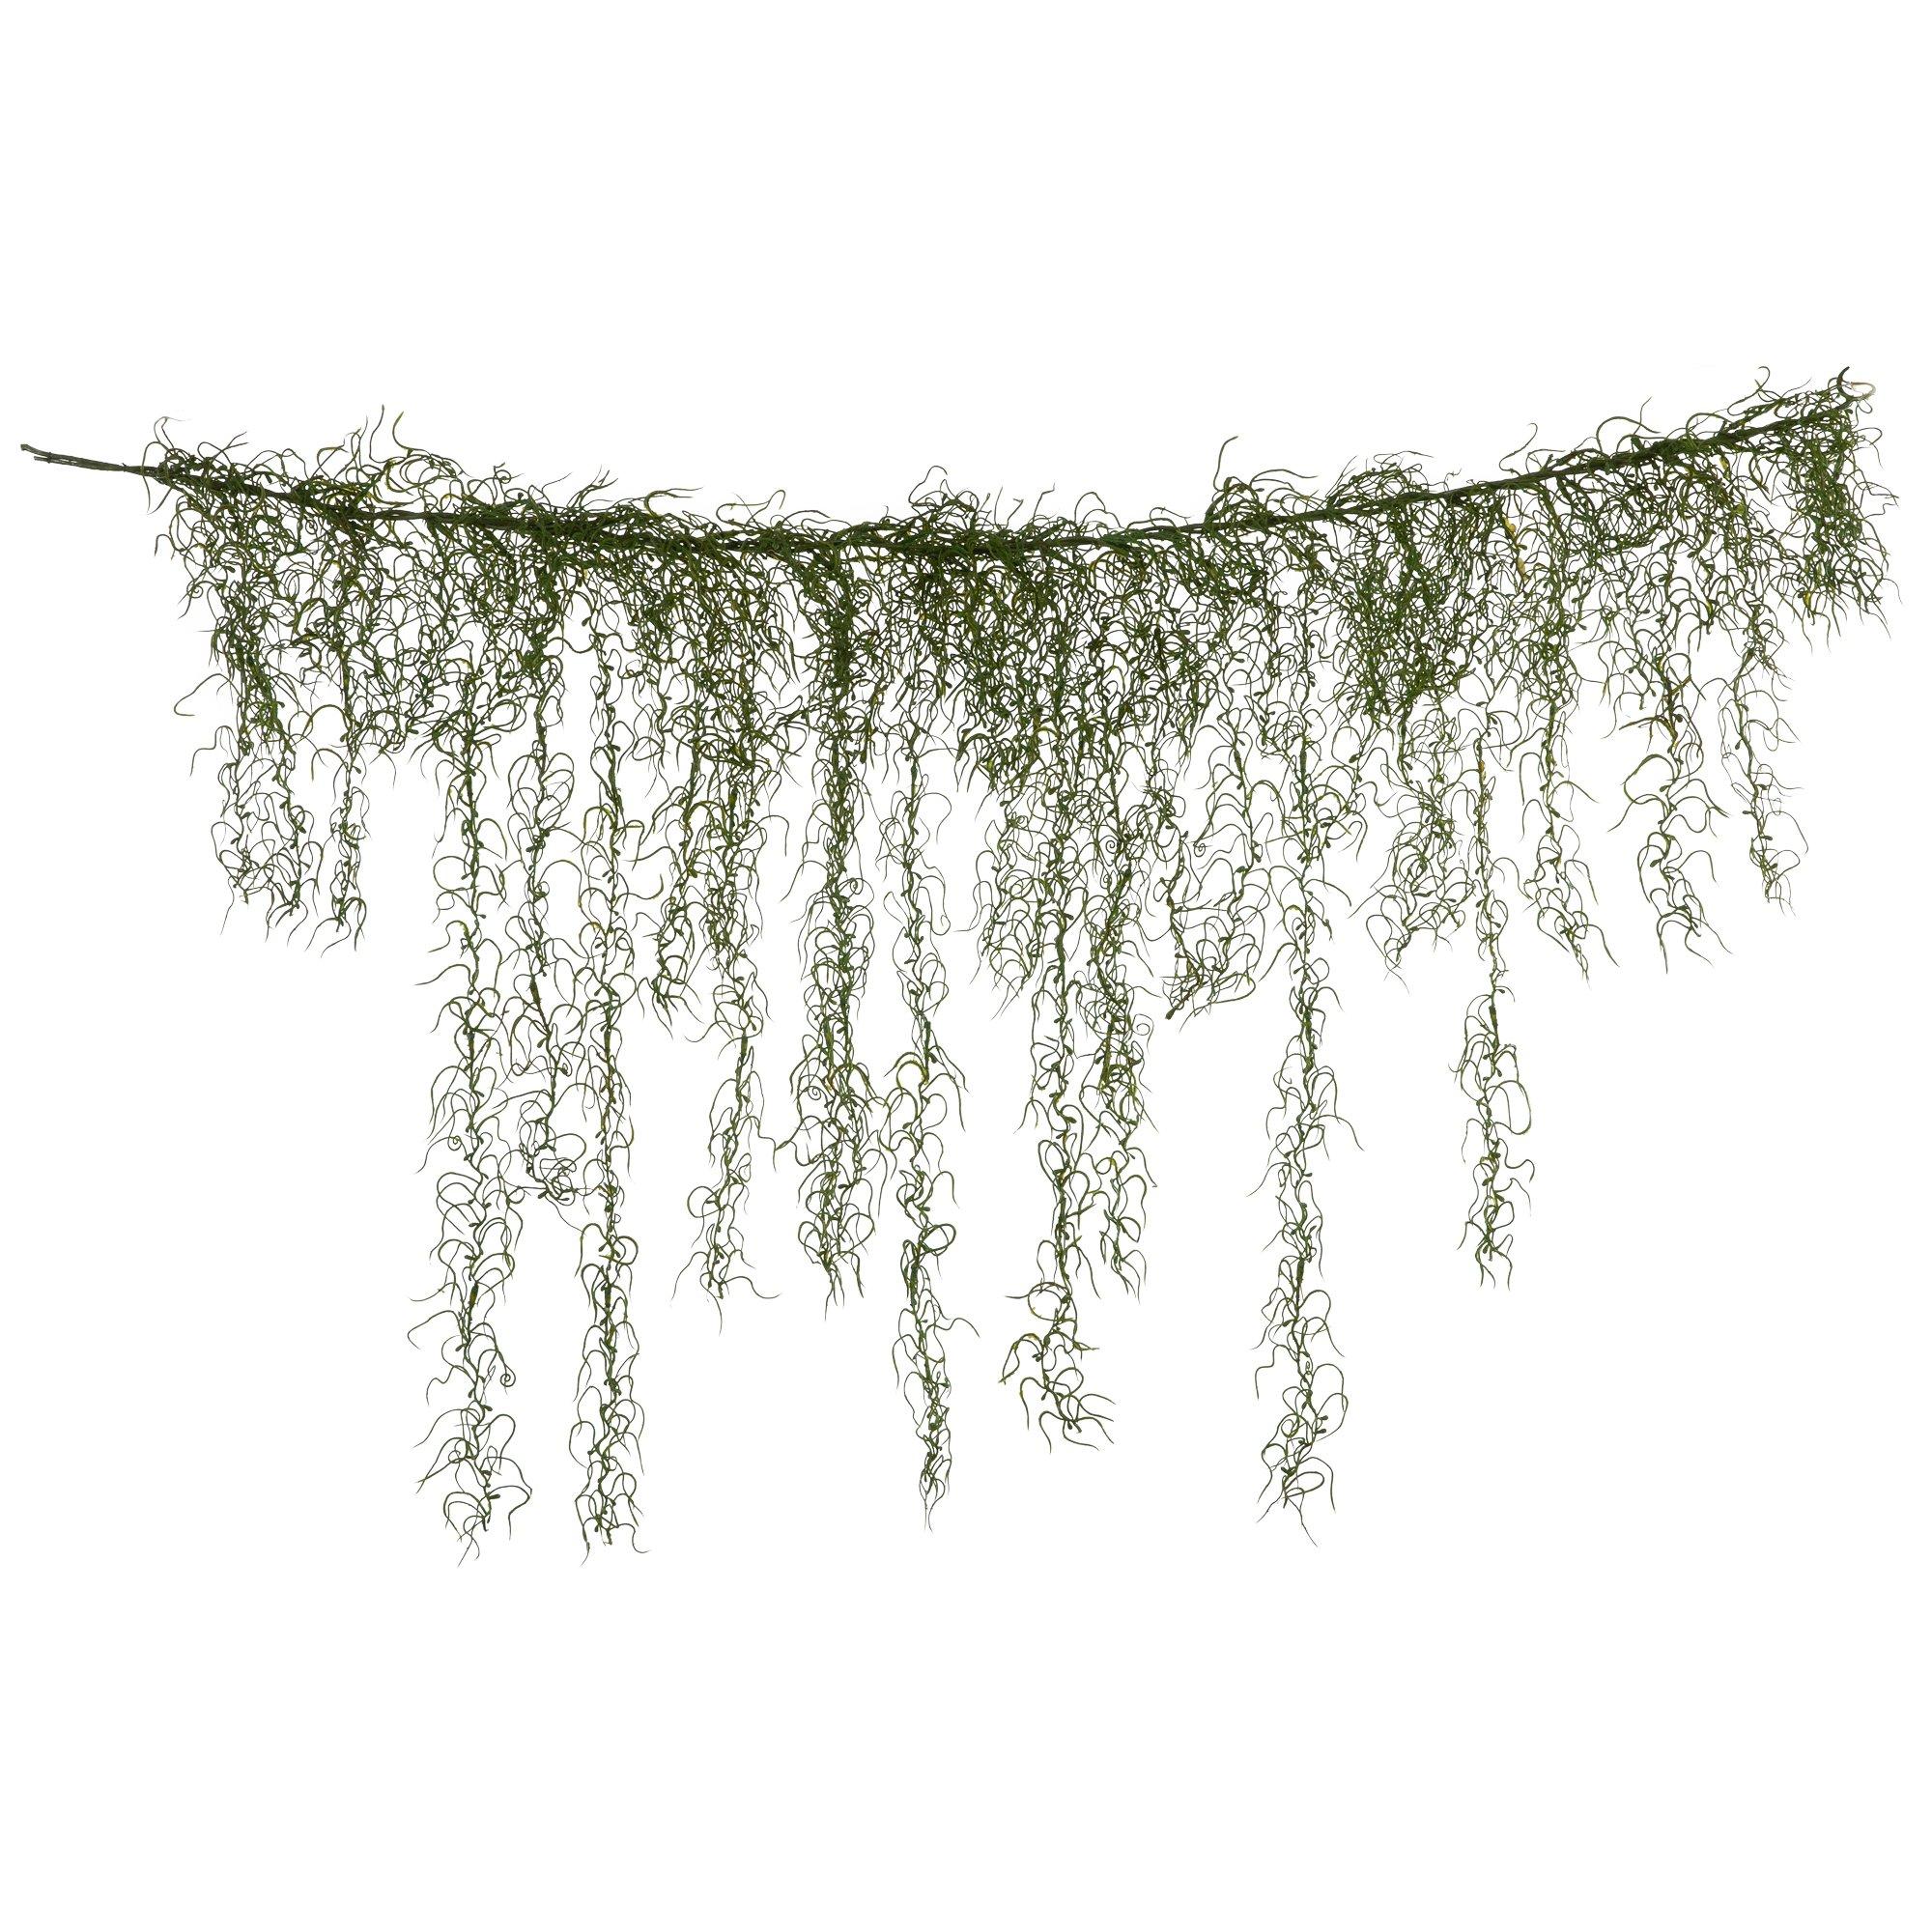  COTSEN 5 Pack Spanish Moss Faux Greenery Moss Fake Vines Moss  Hanging Plants for Potted Plants Artificial Hanging Moss Garland Used for  Family Indoor and Outdoor Gardens Decoration : Home 